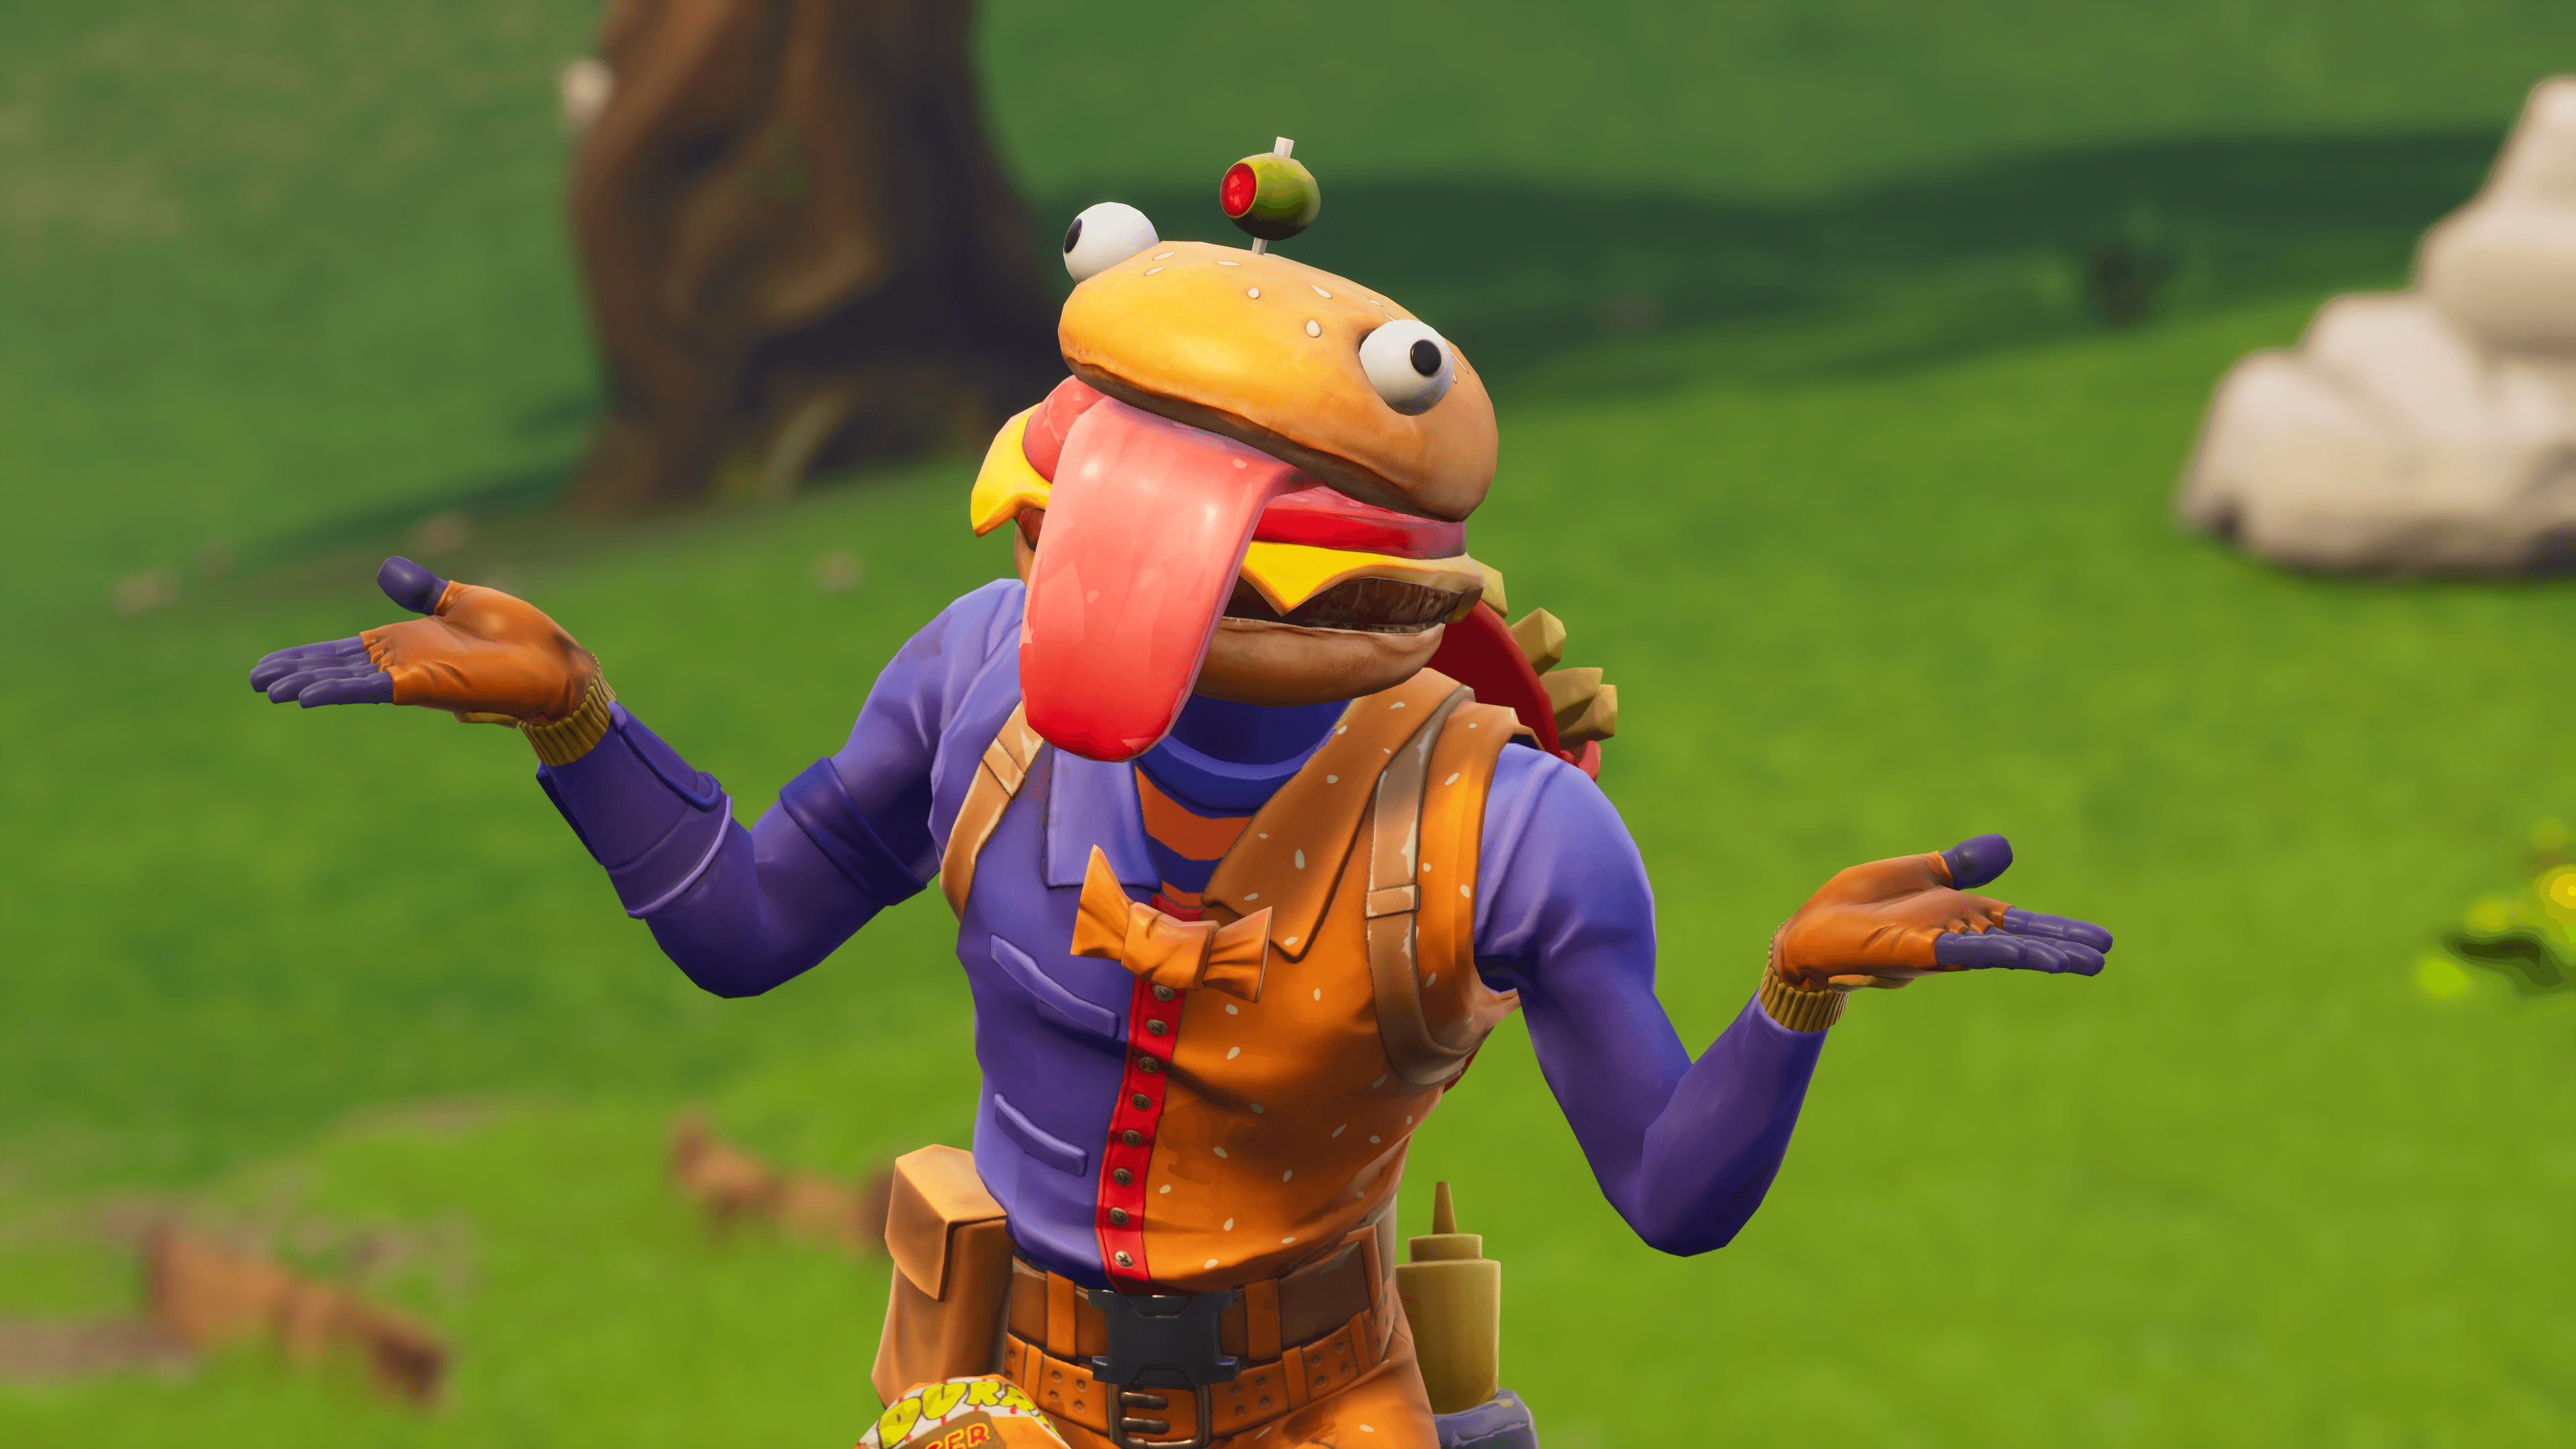 4k wallpaper of Beef Boss and the new emote